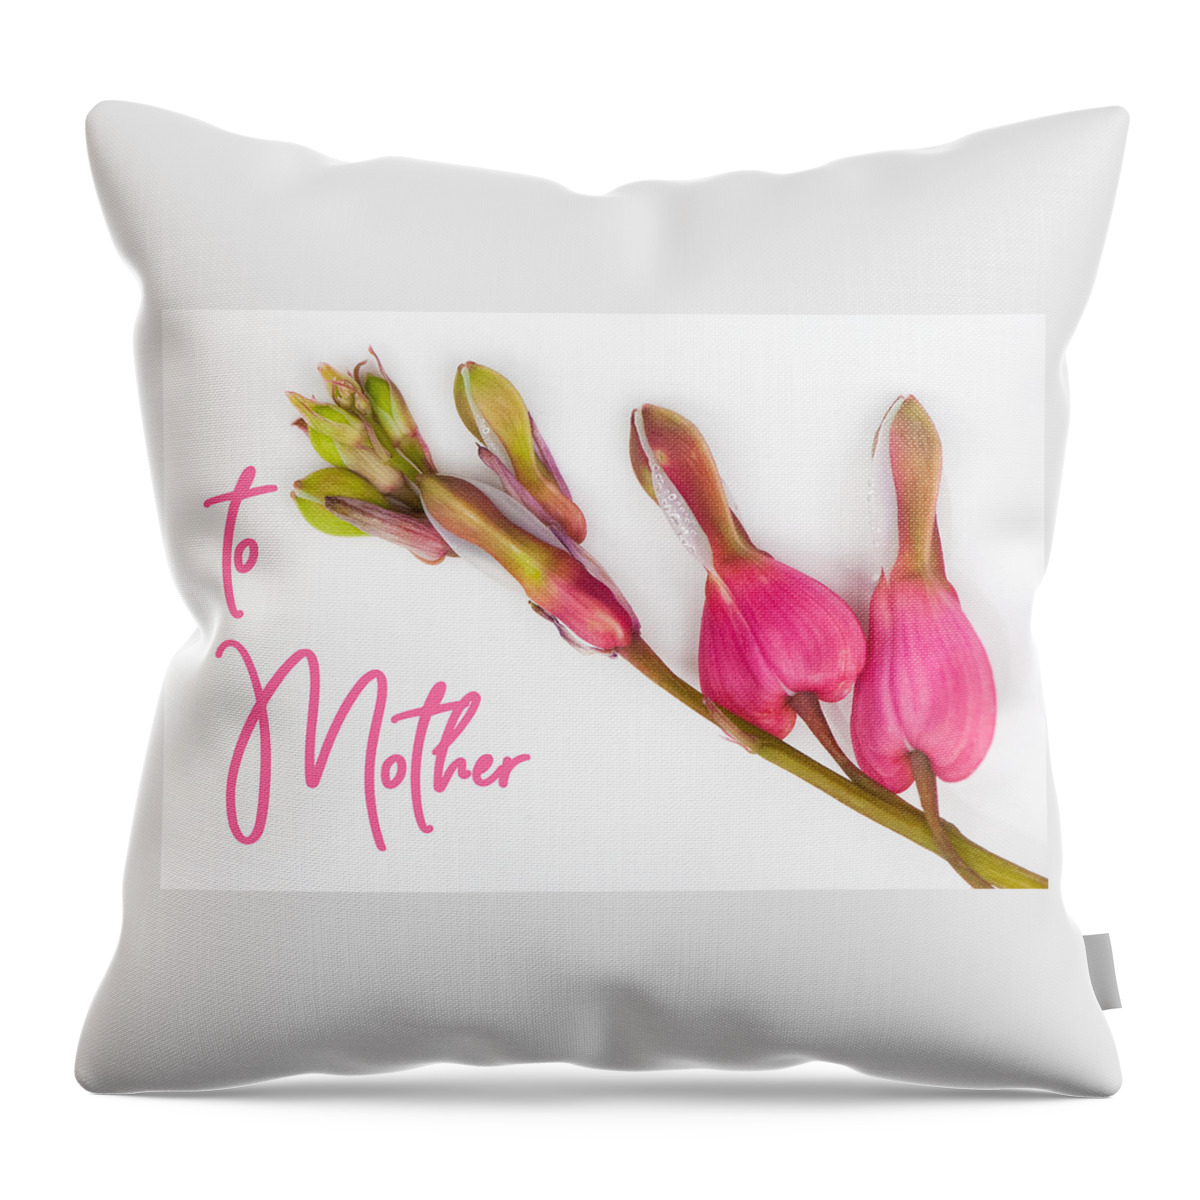 Bleeding Heart Throw Pillow featuring the mixed media To Mother by Moira Law